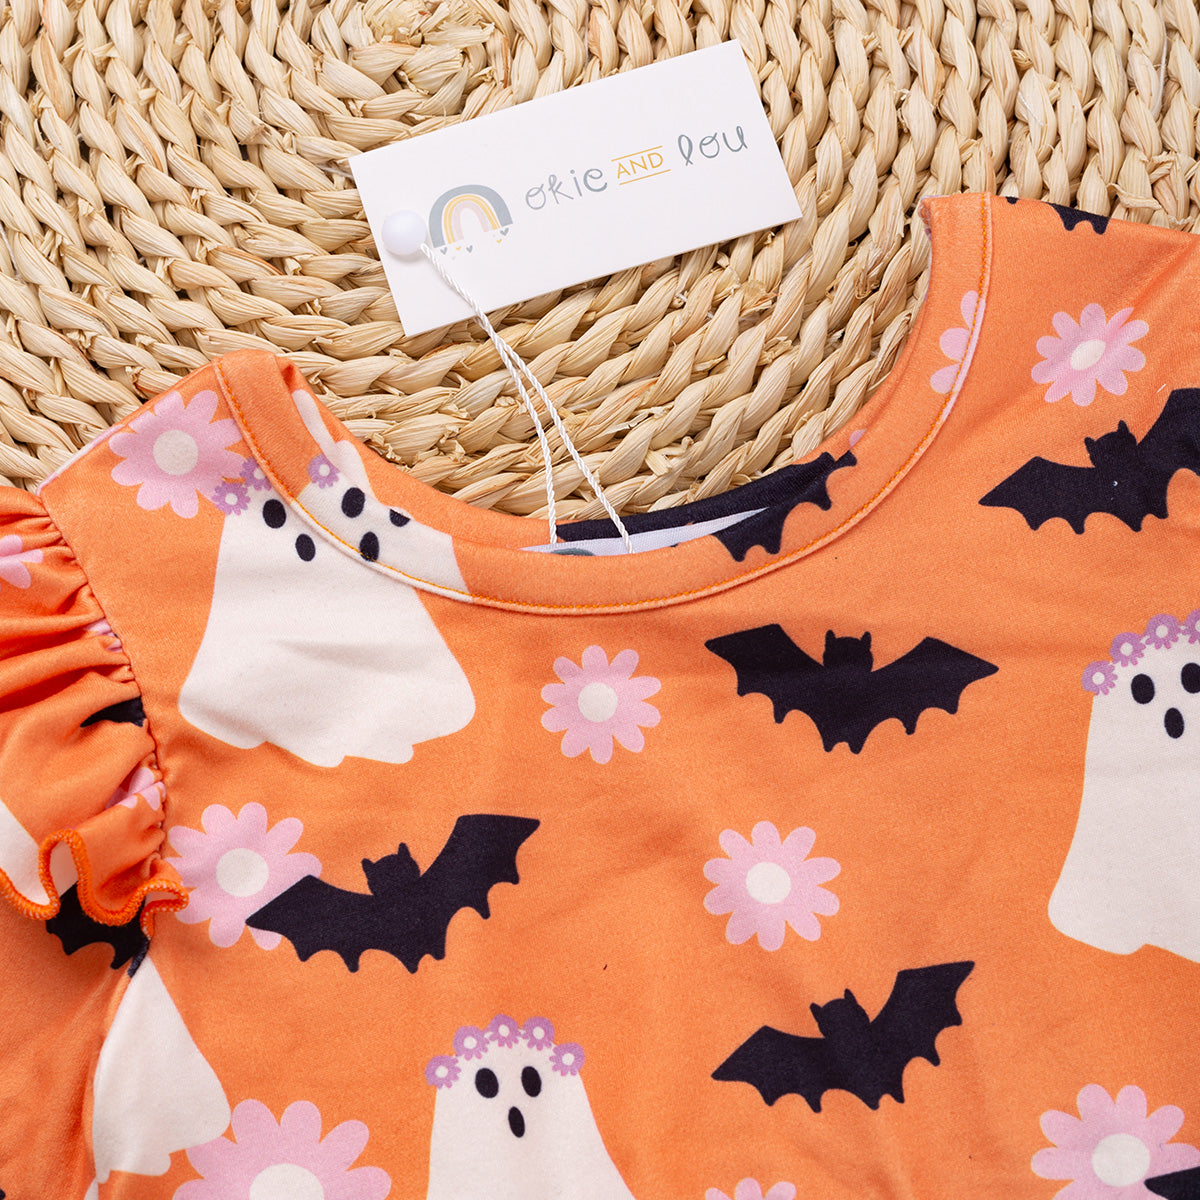 PREORDER: Groovy Boo - Girl Infant Romper